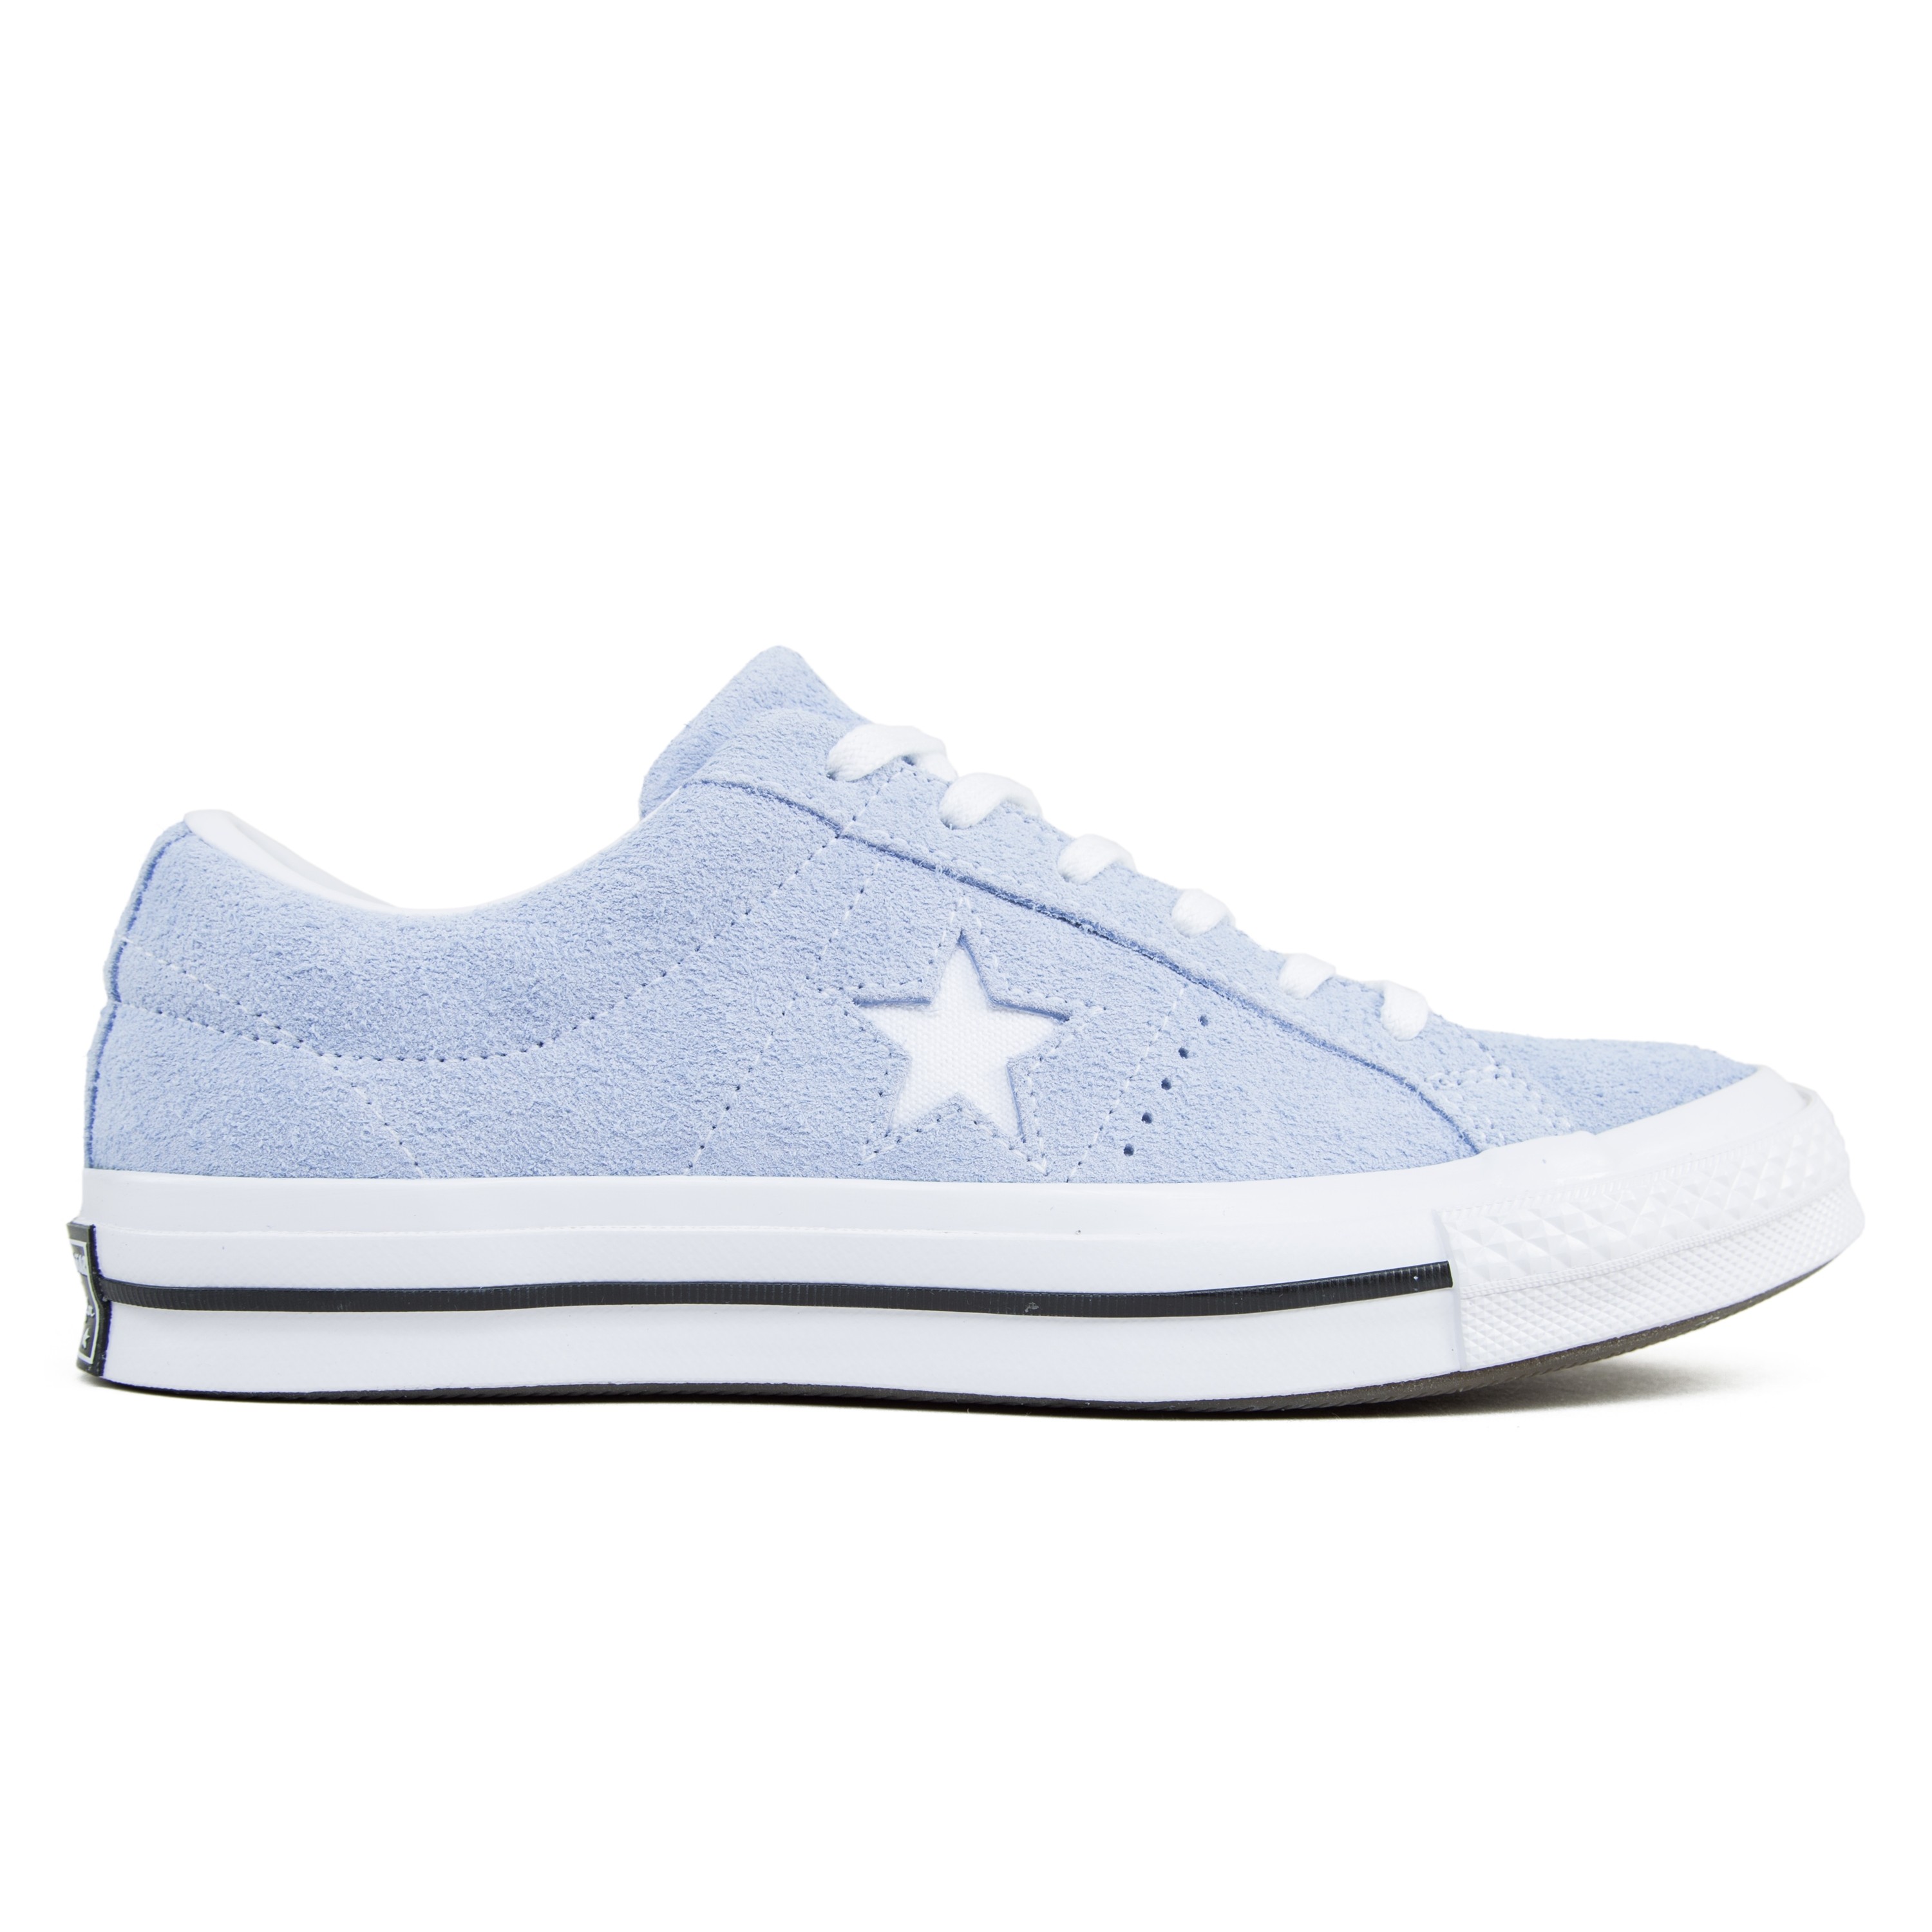 Buy men's Converse One Star OX basketball shoe in Blue Chill/White ...